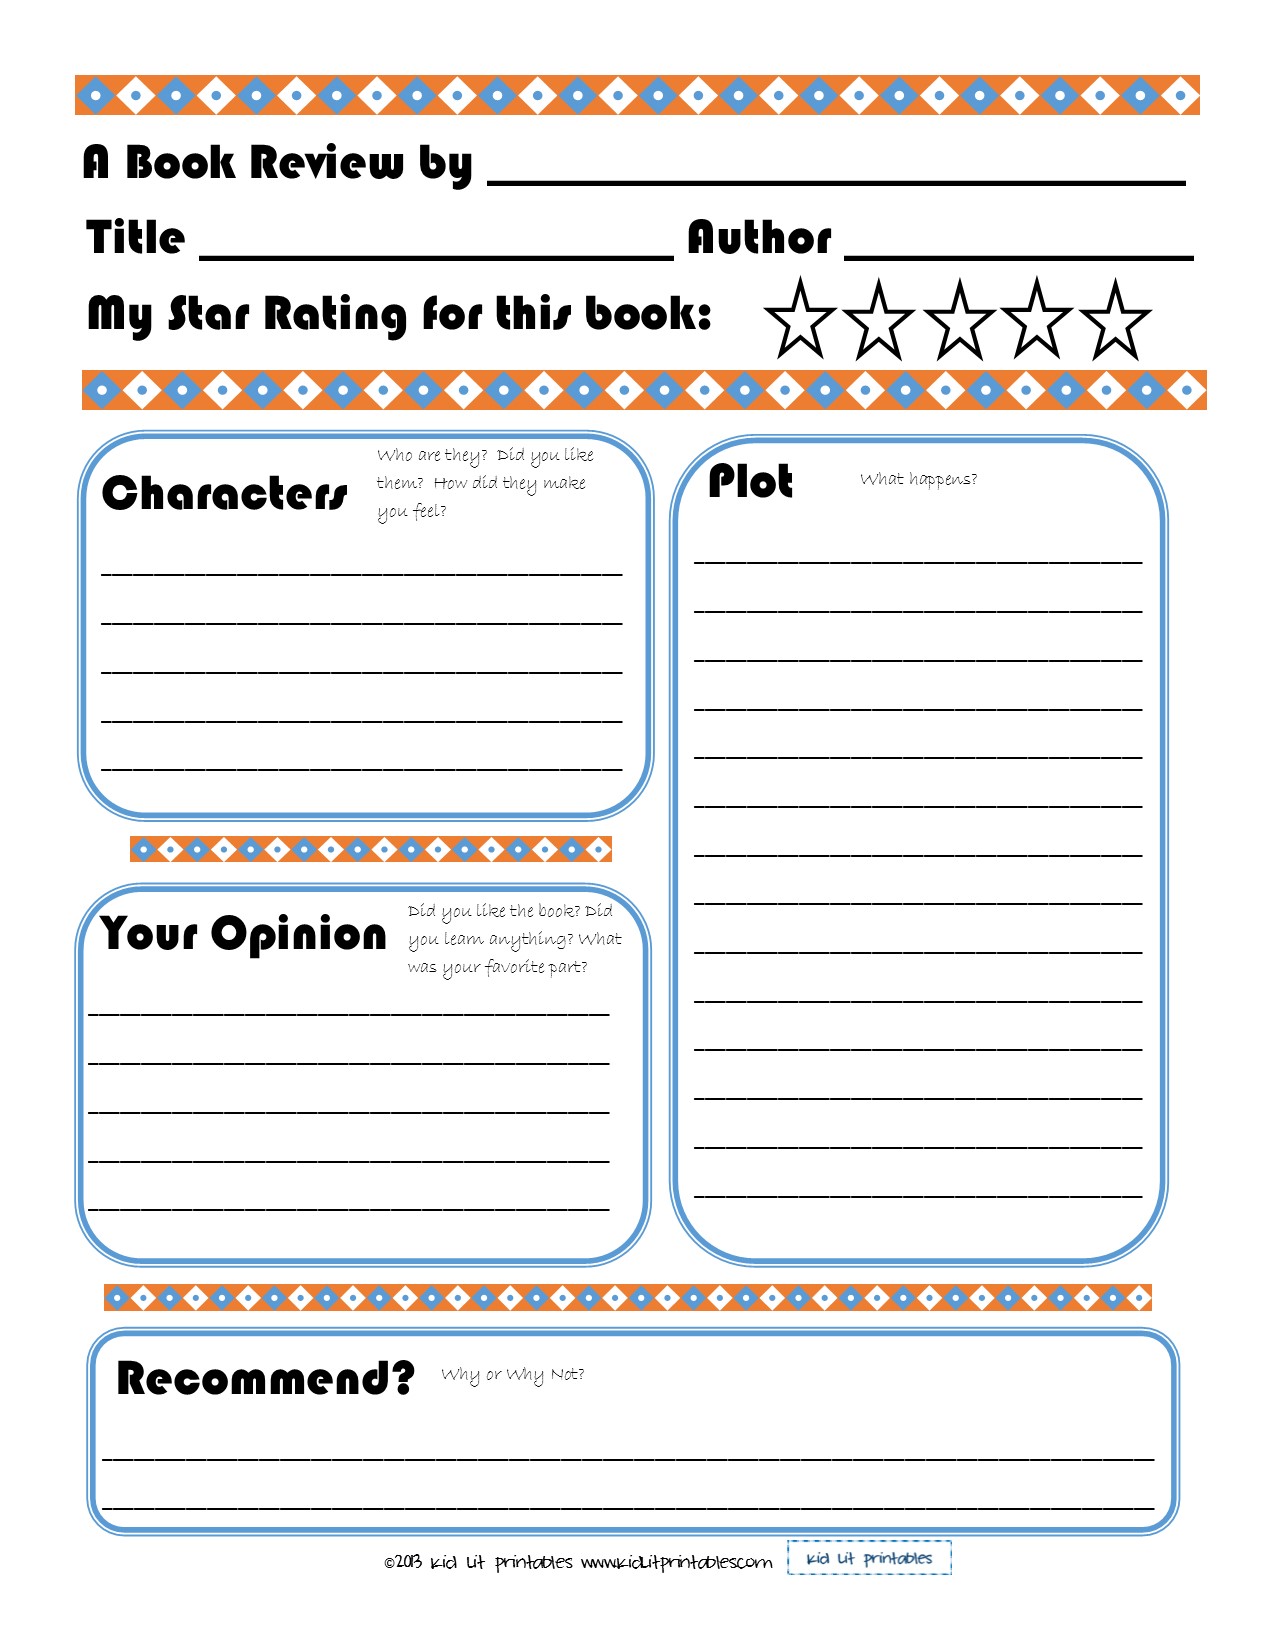 elementary school book report template With Regard To Book Report Template 5th Grade